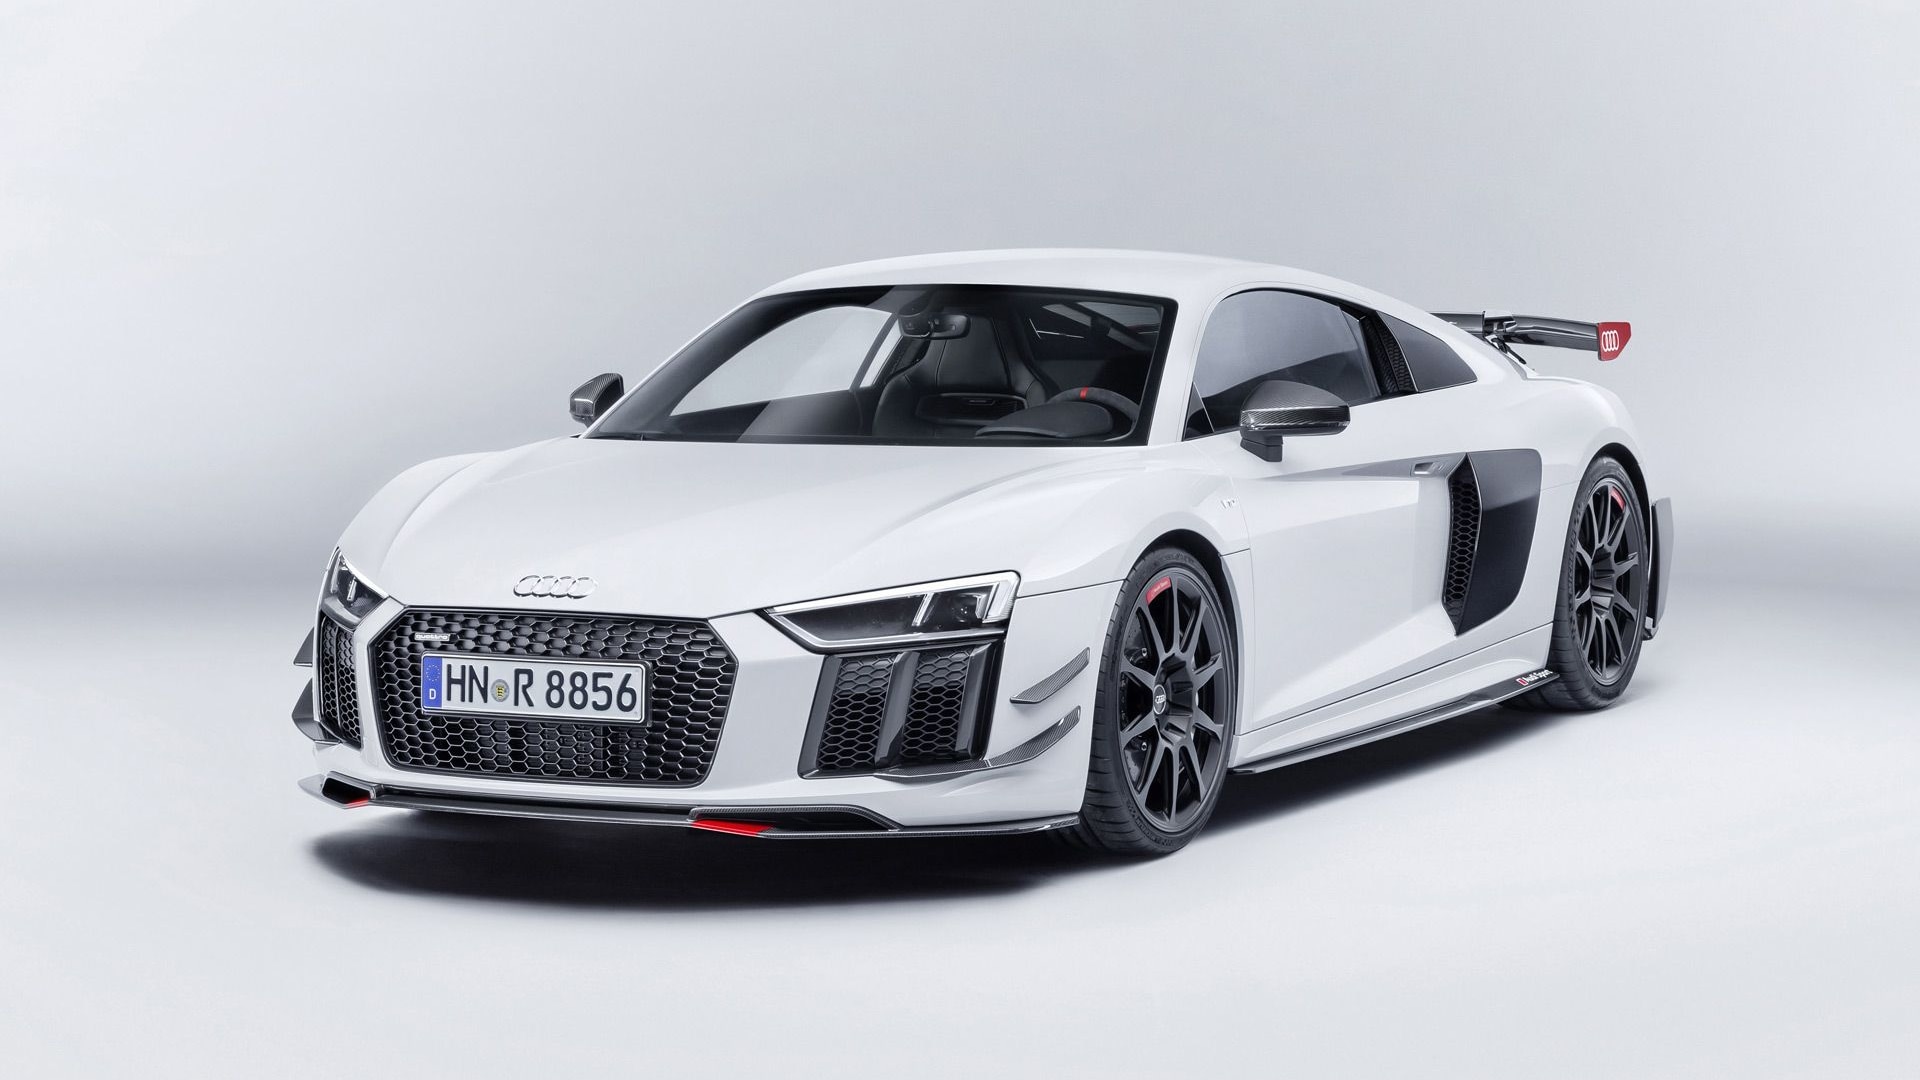 2018 Audi R8 fitted with items from Audi Sport Performance Parts range